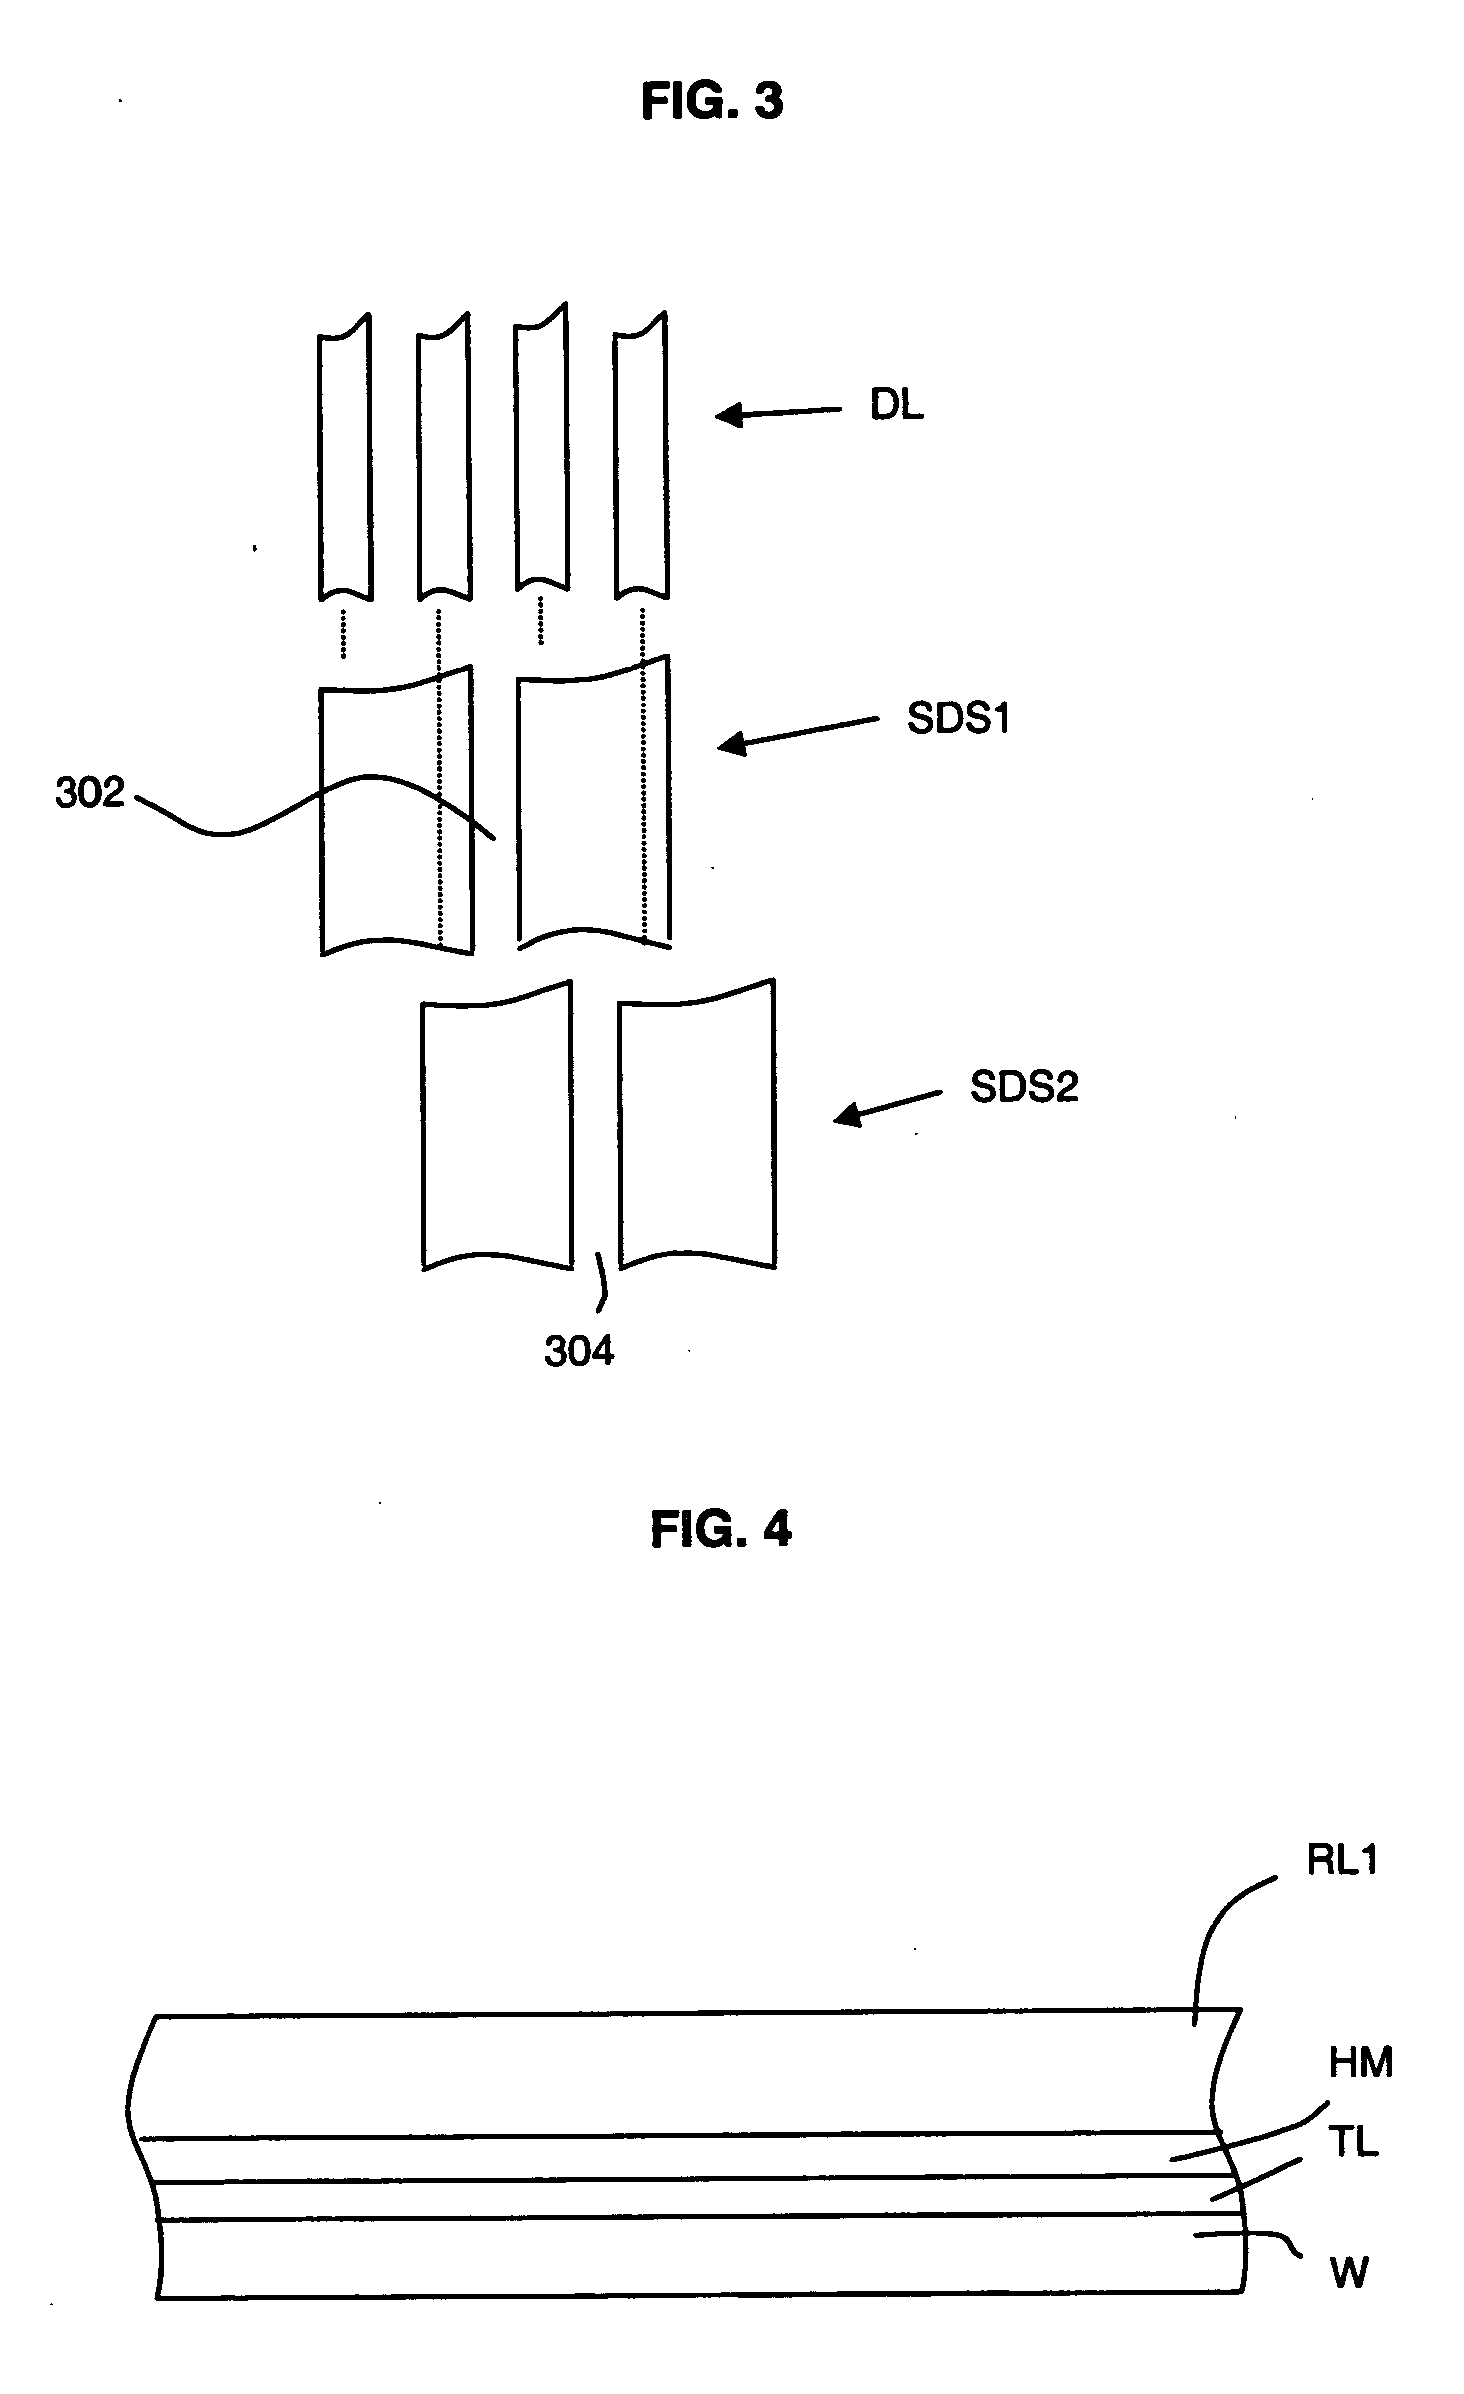 Method of patterning a positive tone resist layer overlaying a lithographic substrate